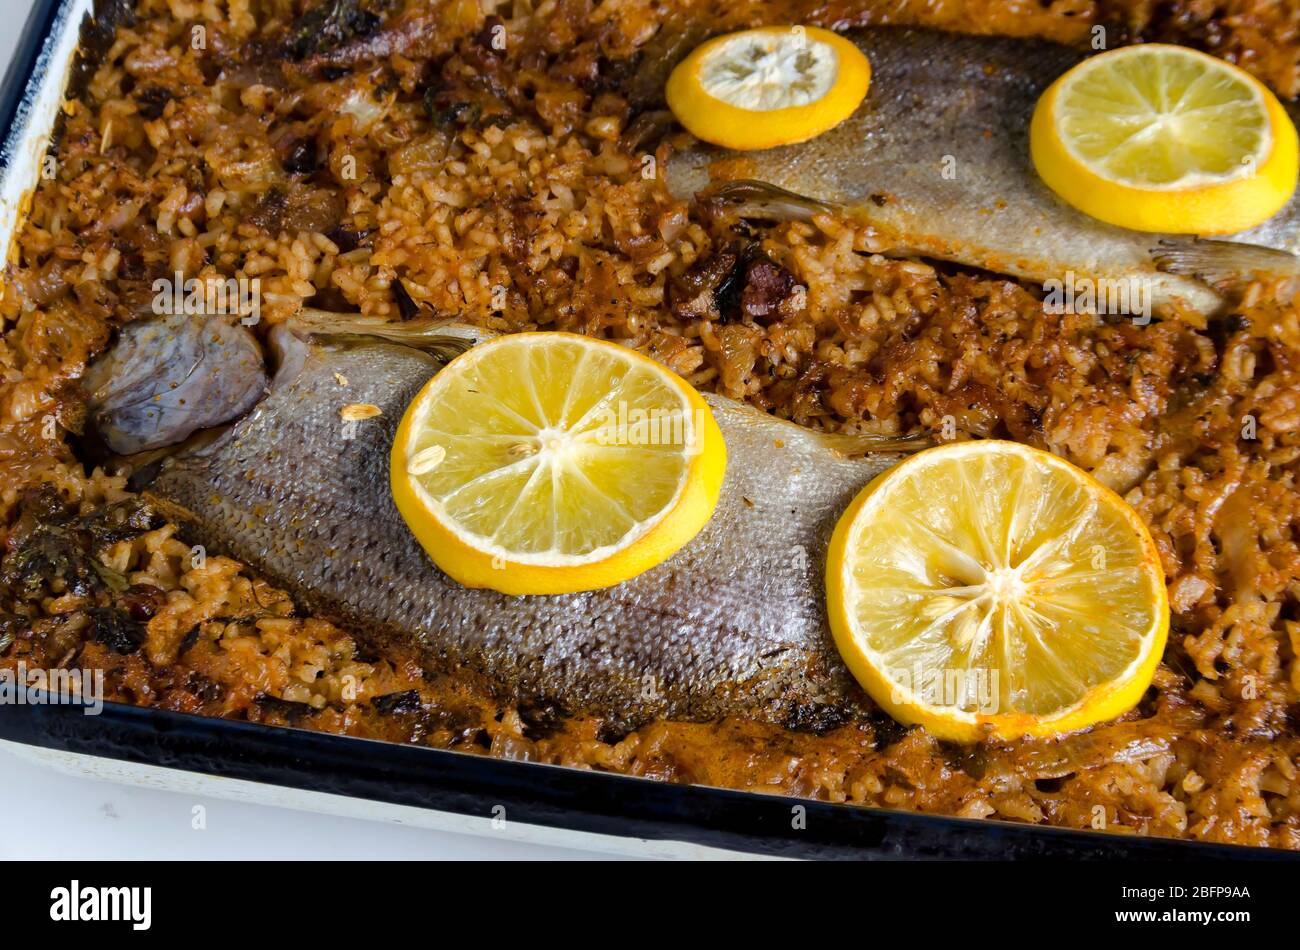 Roasted trout fish on rice and lemon slices on top, Sofia, Bulgaria Stock Photo